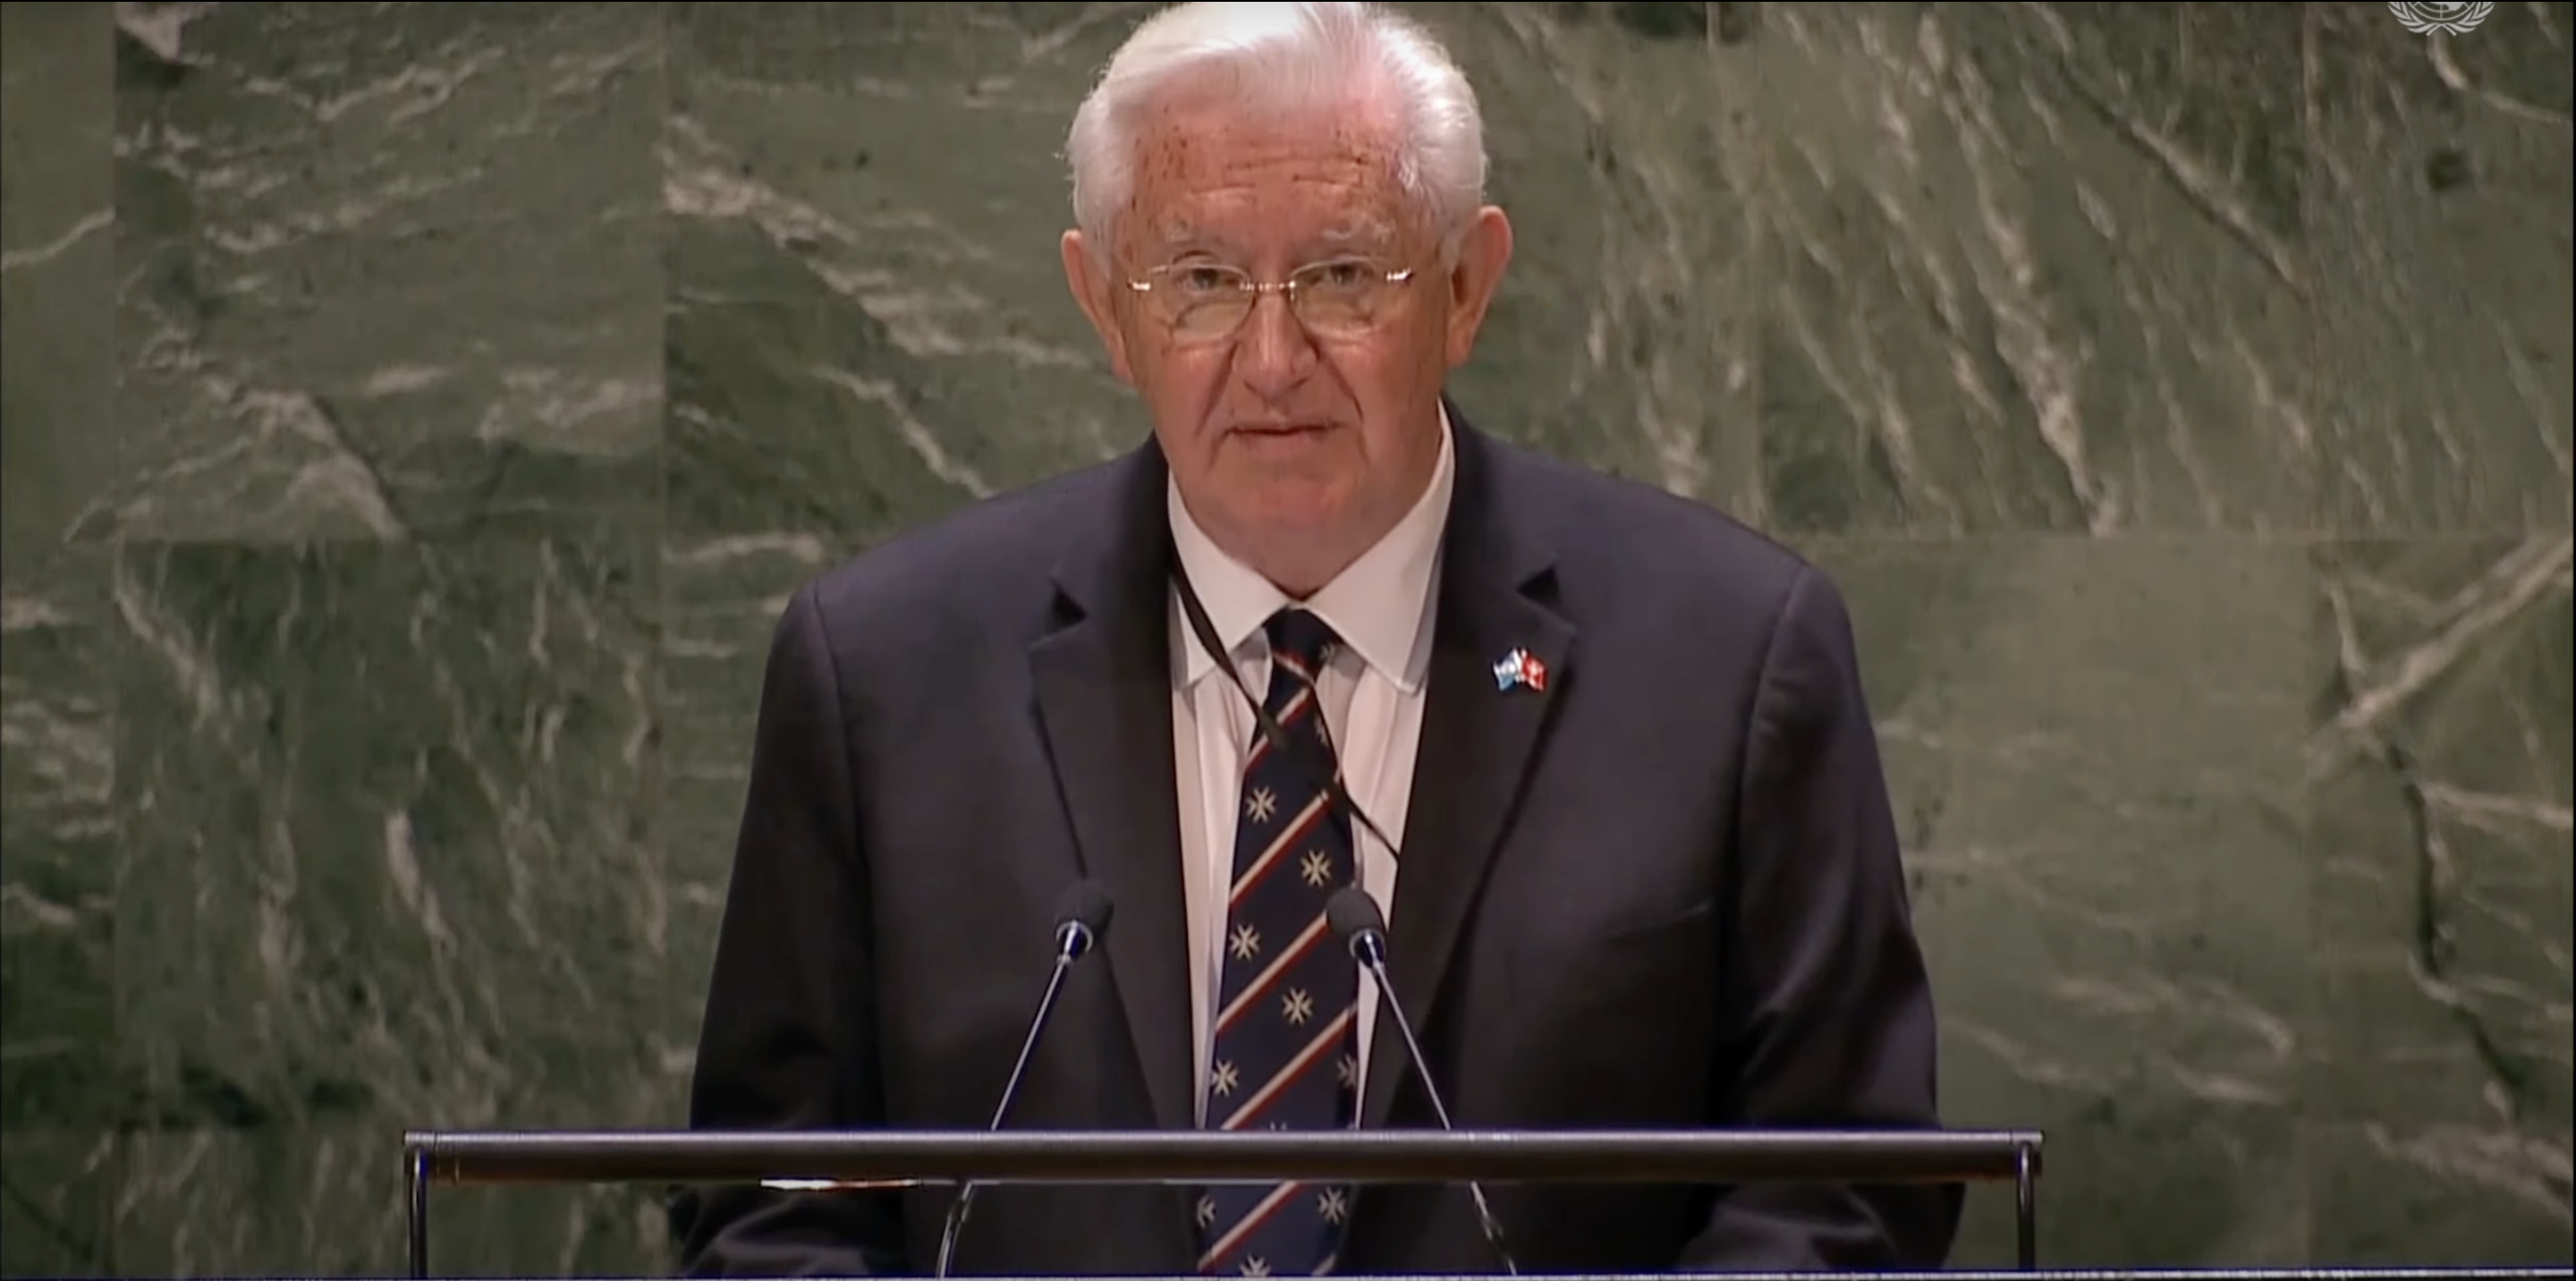 H.E. Ambassador Beresford-Hill addressed the General Assembly regarding the responsibility to prevent genocide, war crimes, ethnic cleansing, and crimes against humanity